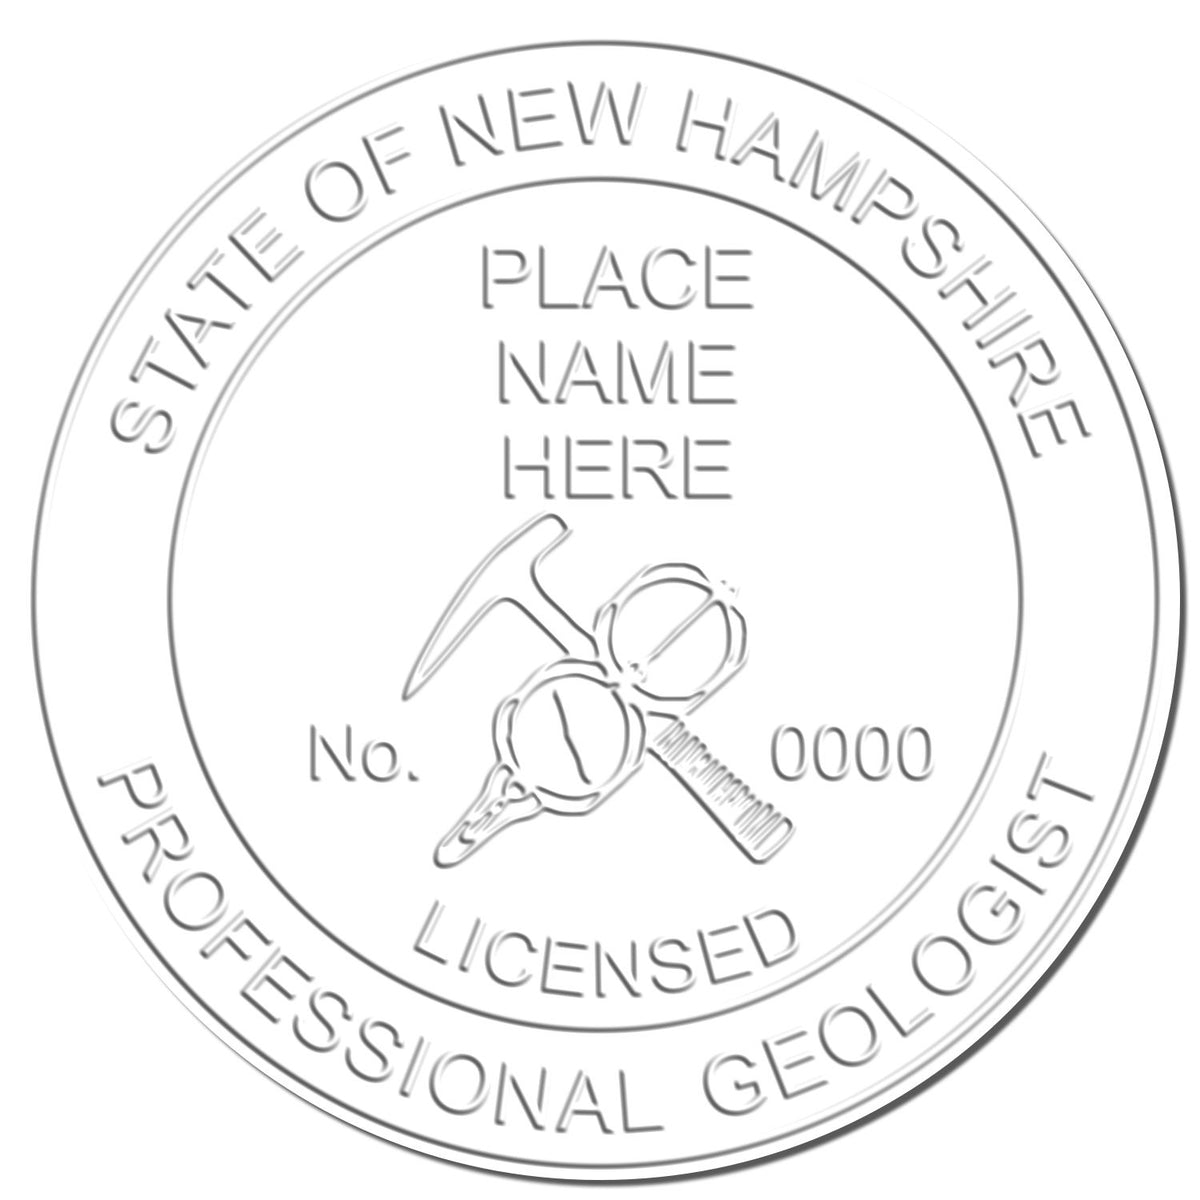 A stamped imprint of the Soft New Hampshire Professional Geologist Seal in this stylish lifestyle photo, setting the tone for a unique and personalized product.